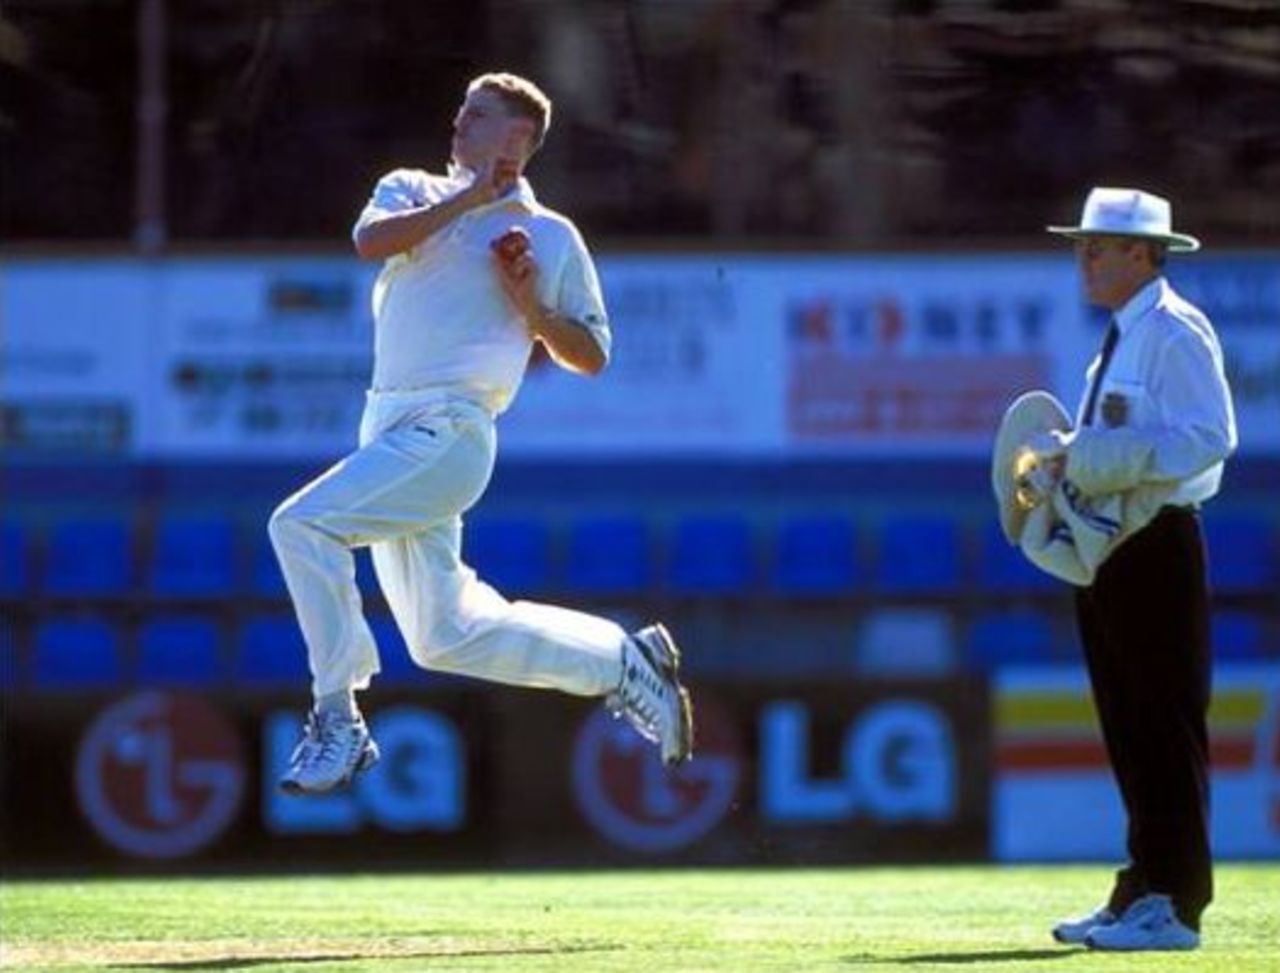 7 Nov 2000: New South Wales bowler Nathan Bracken in action during the Pura Cup match between Tasmania and New South Wales, played at Bellerive Oval, Hobart, Tasmania, Australia.